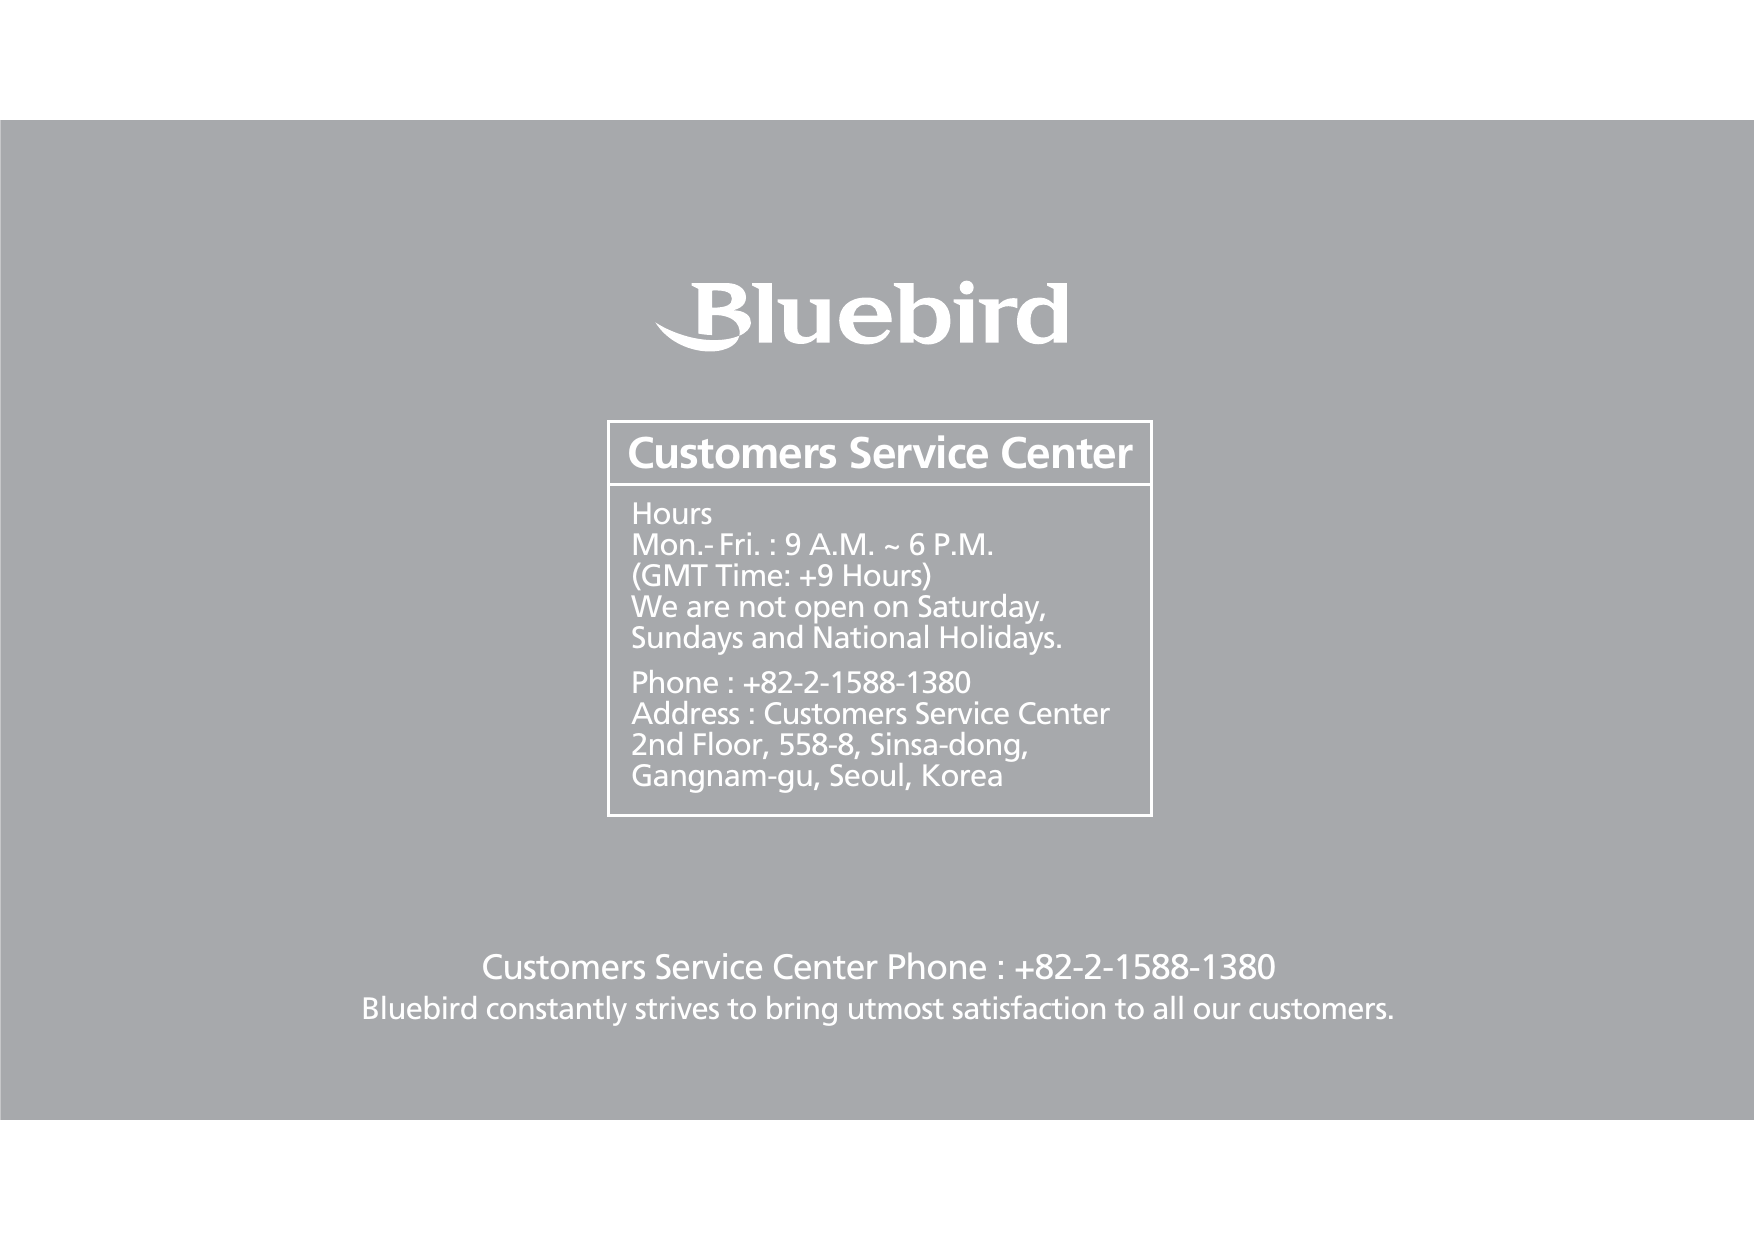 Customers Service Center Phone : +82-2-1588-1380Bluebird constantly strives to bring utmost satisfaction to all our customers.Hours Mon.- Fri. : 9 A.M. ~ 6 P.M.(GMT Time: +9 Hours)We are not open on Saturday,Sundays and National Holidays.Phone : +82-2-1588-1380Address : Customers Service Center 2nd Floor, 558-8, Sinsa-dong, Gangnam-gu, Seoul, KoreaCustomers Service Center